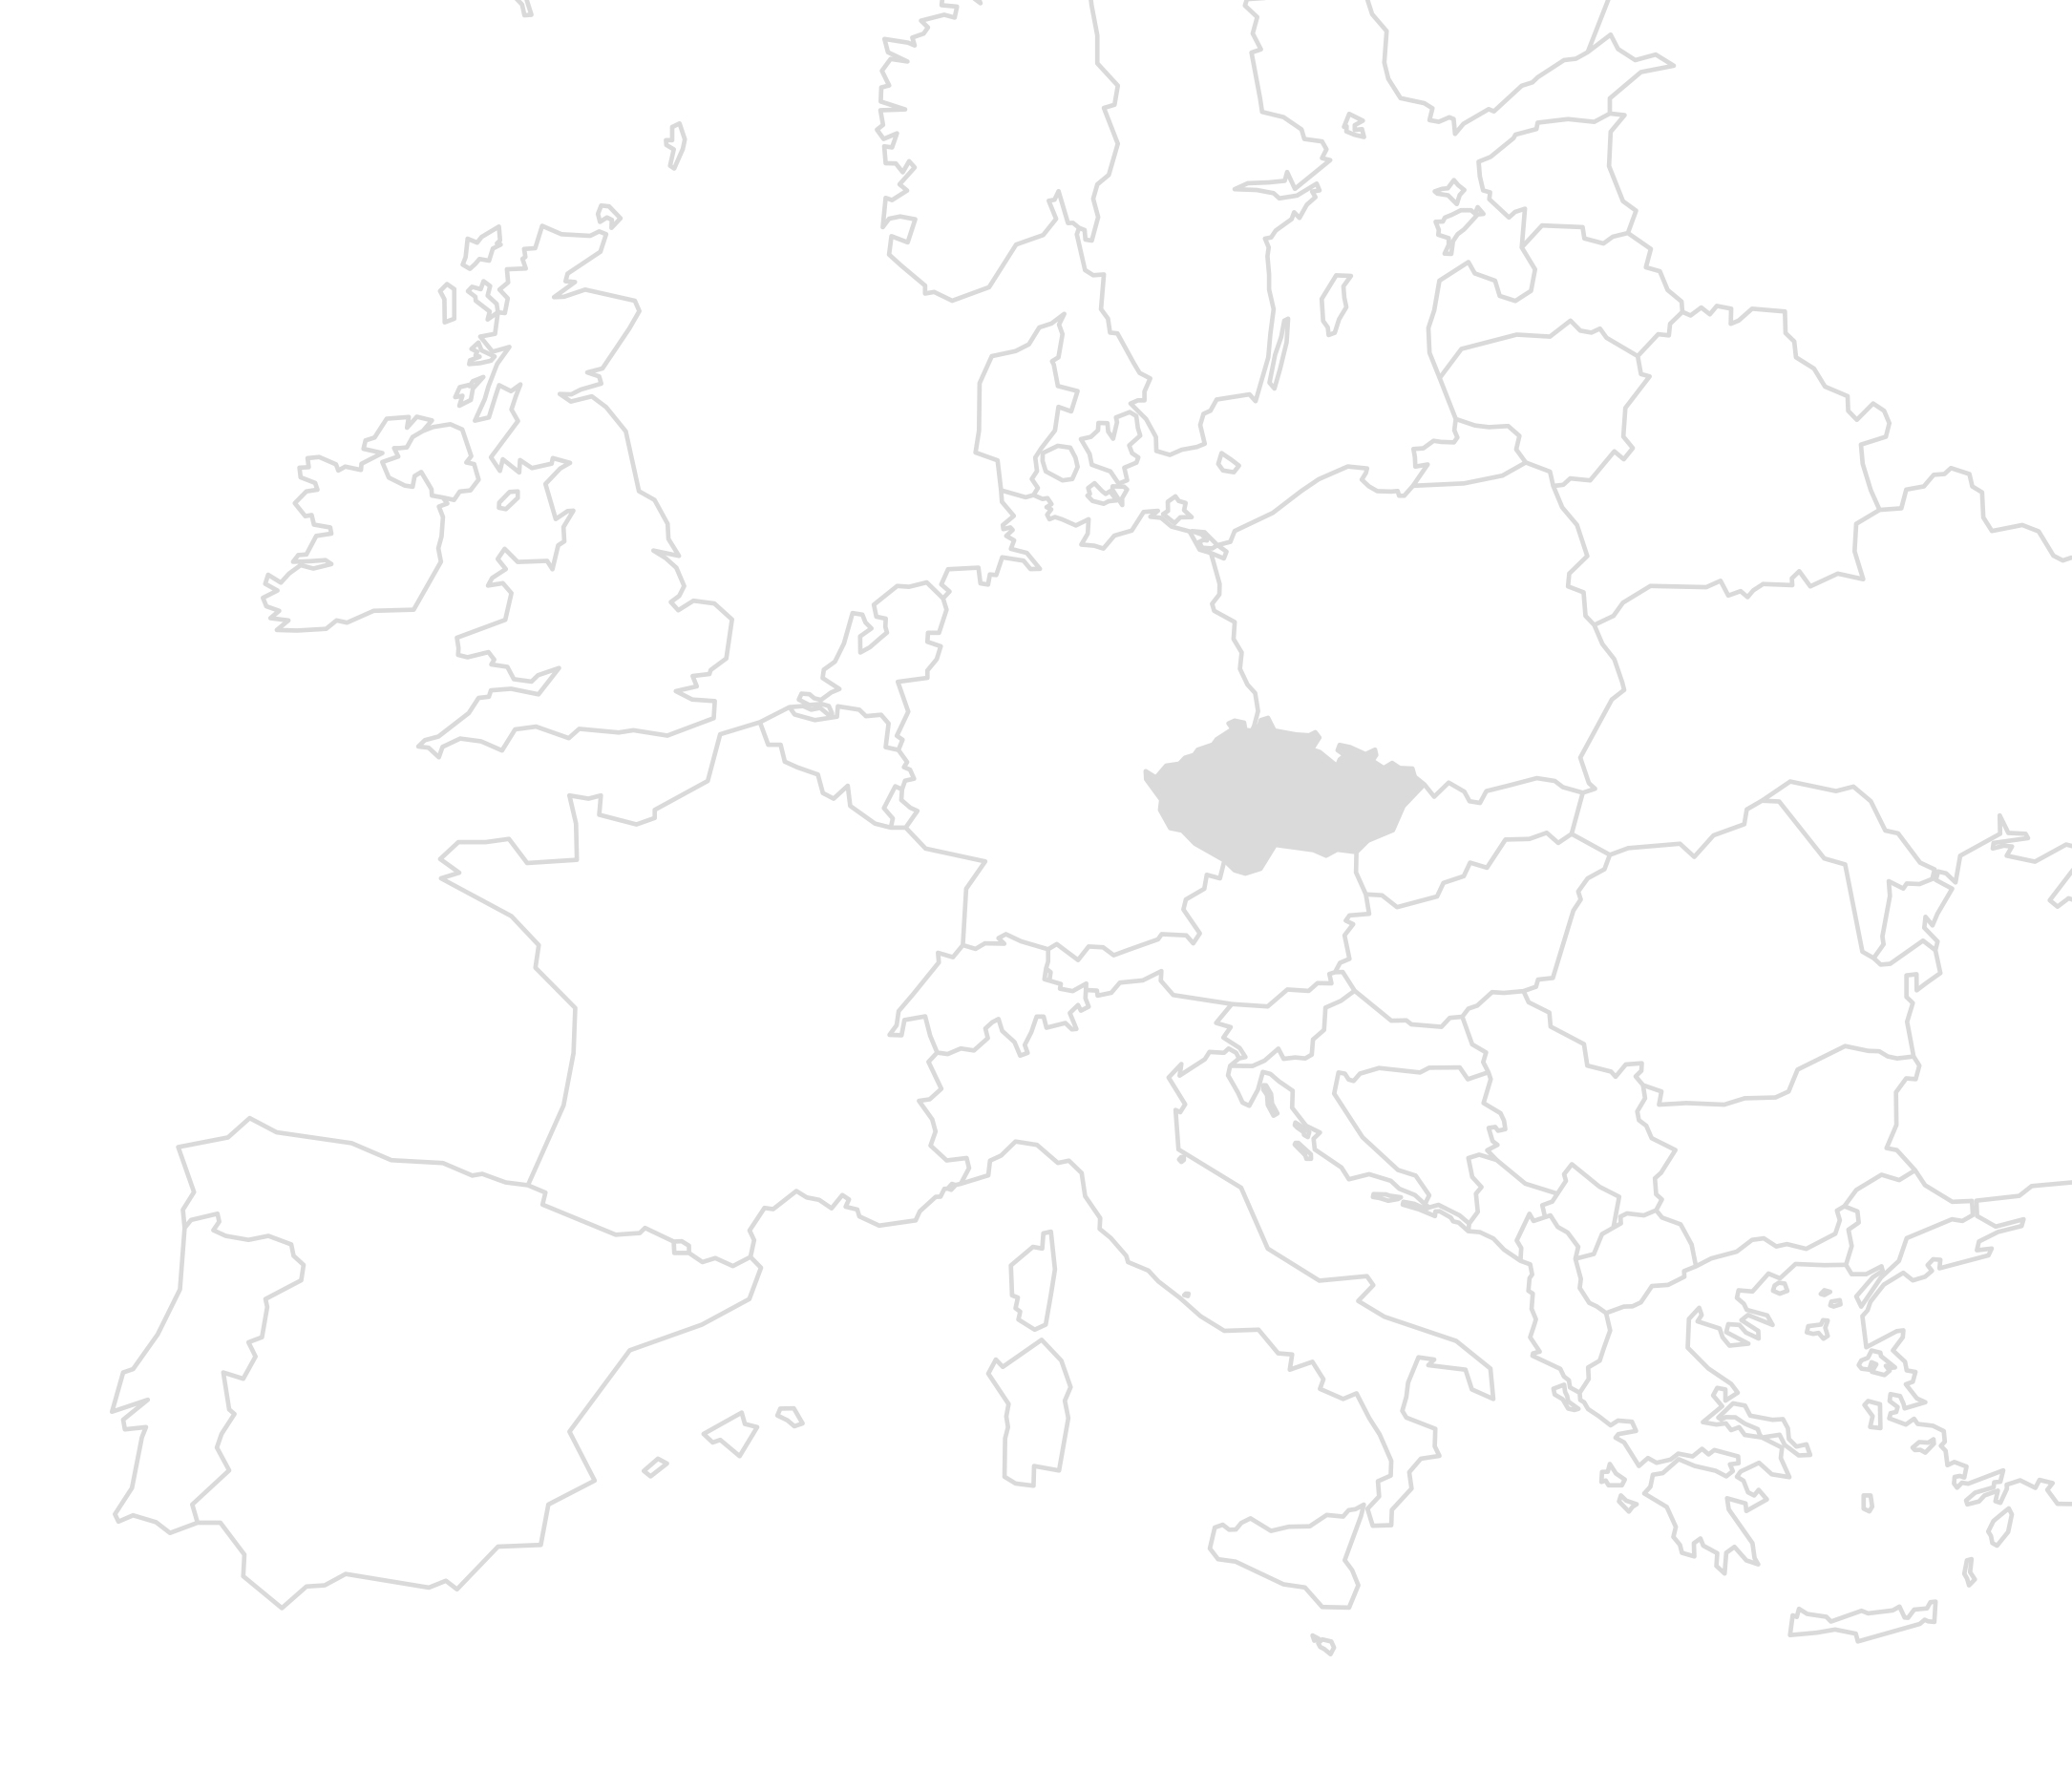 A map of Europe where the Czech Republic is filled in gray to visualize the location of the construction project.